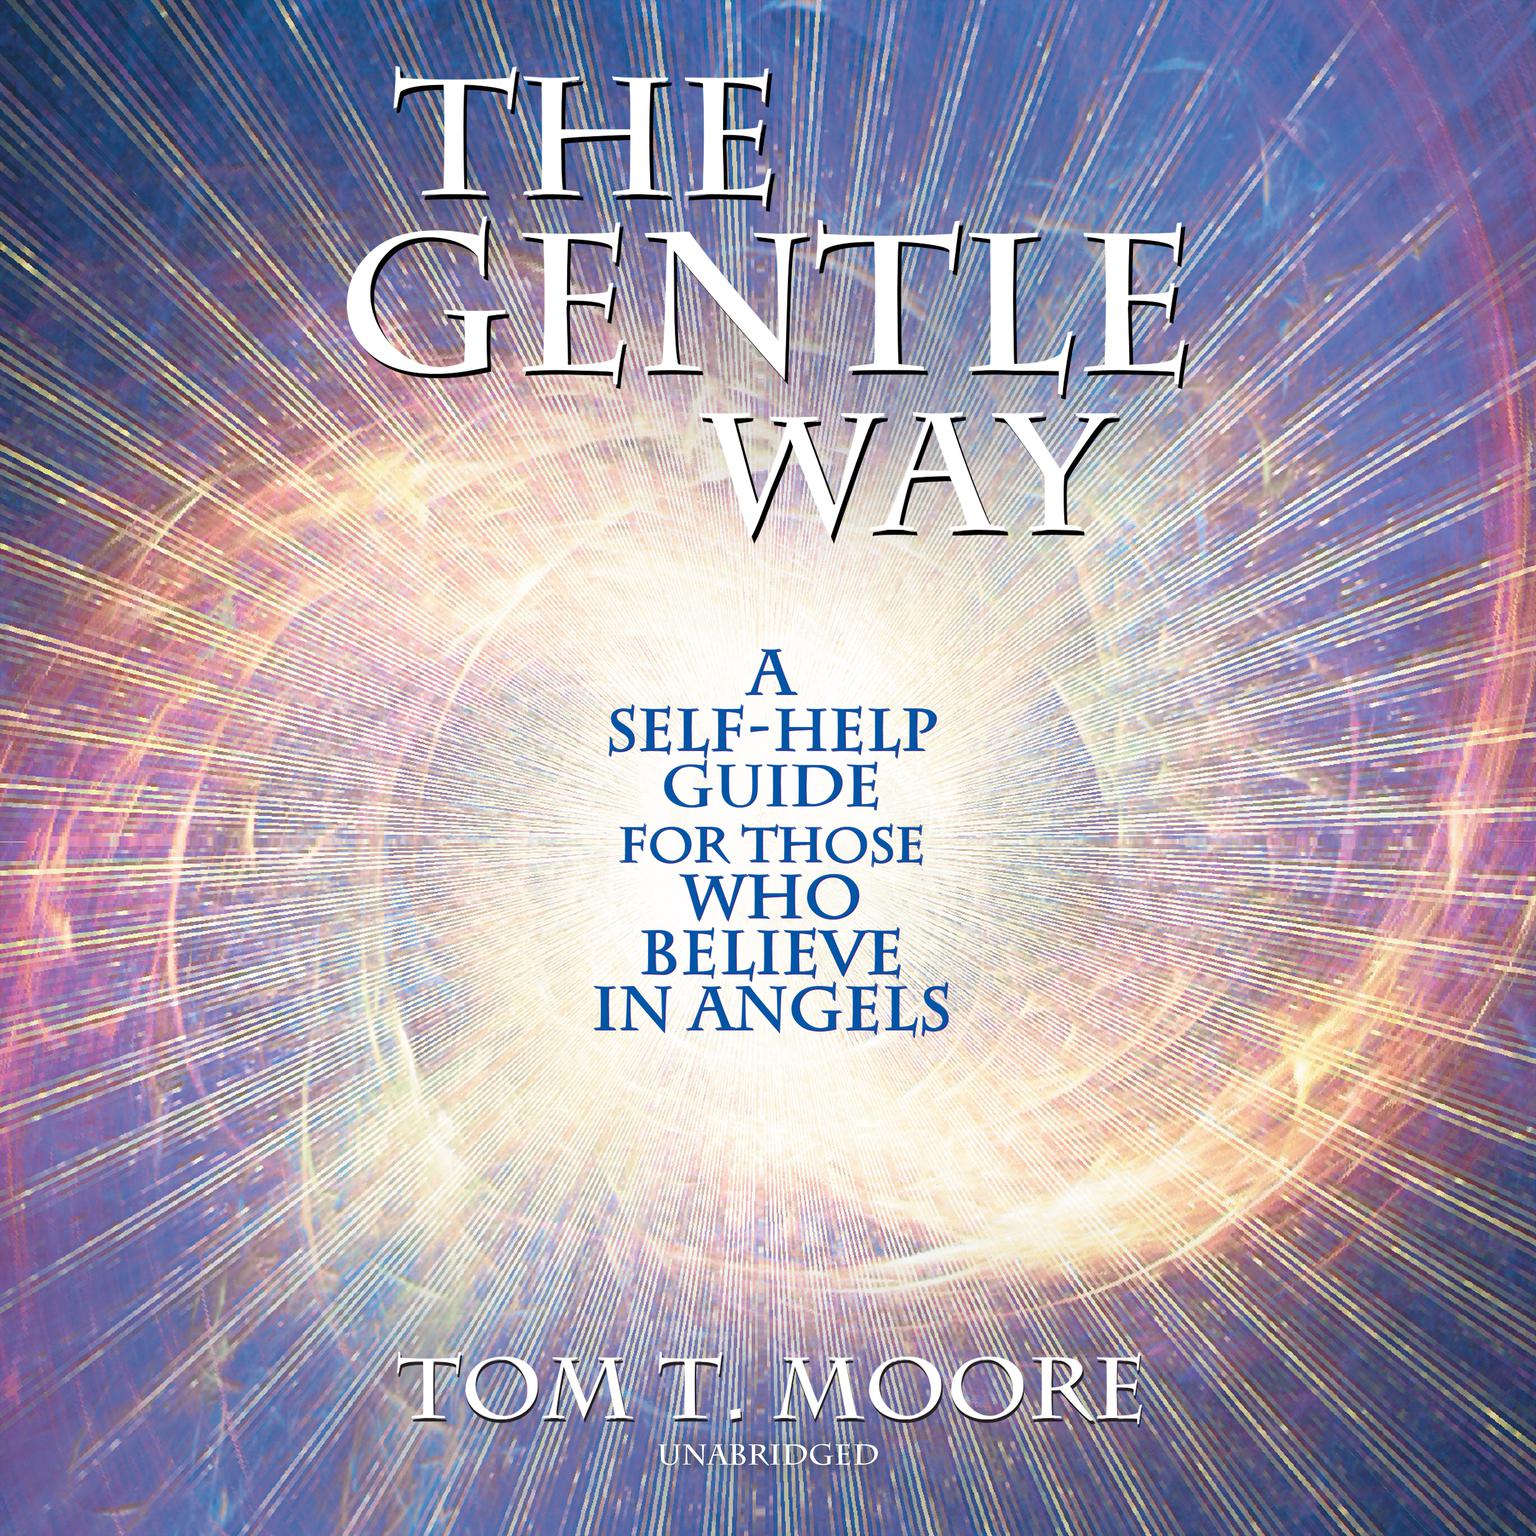 The Gentle Way: A Self-Help Guide for Those Who Believe in Angels Audiobook, by Tom T. Moore